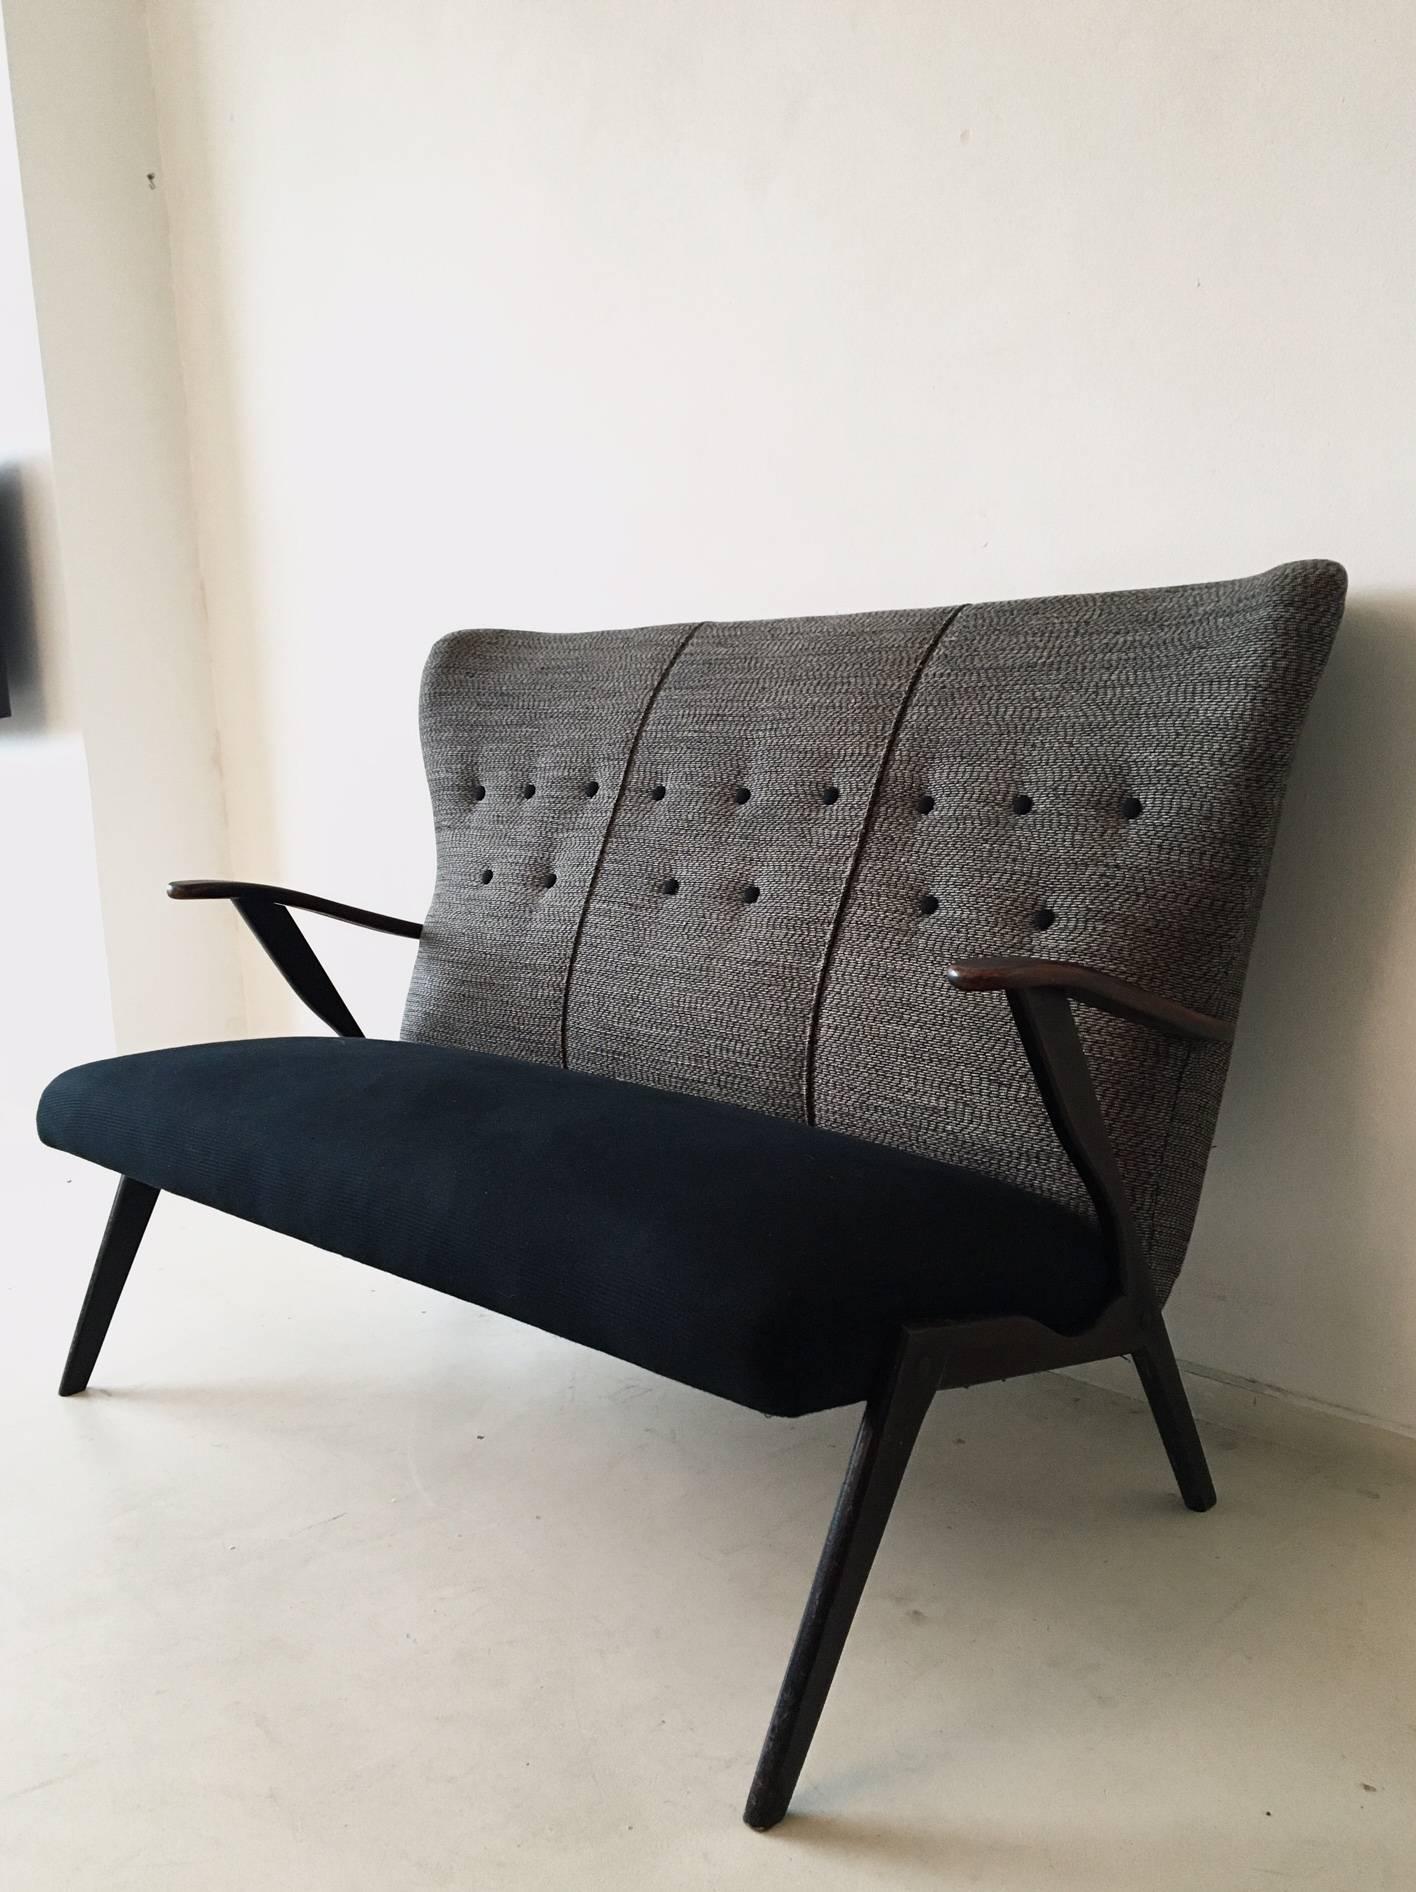 This small grey fabric sofa was designed during the 1950s in the style of Ercol. It was manufactured in Belgium. The sofa features a wooden frame, and a recently re-upholstered dark black fabric seat and dark grey backrest. Although this sofa is in